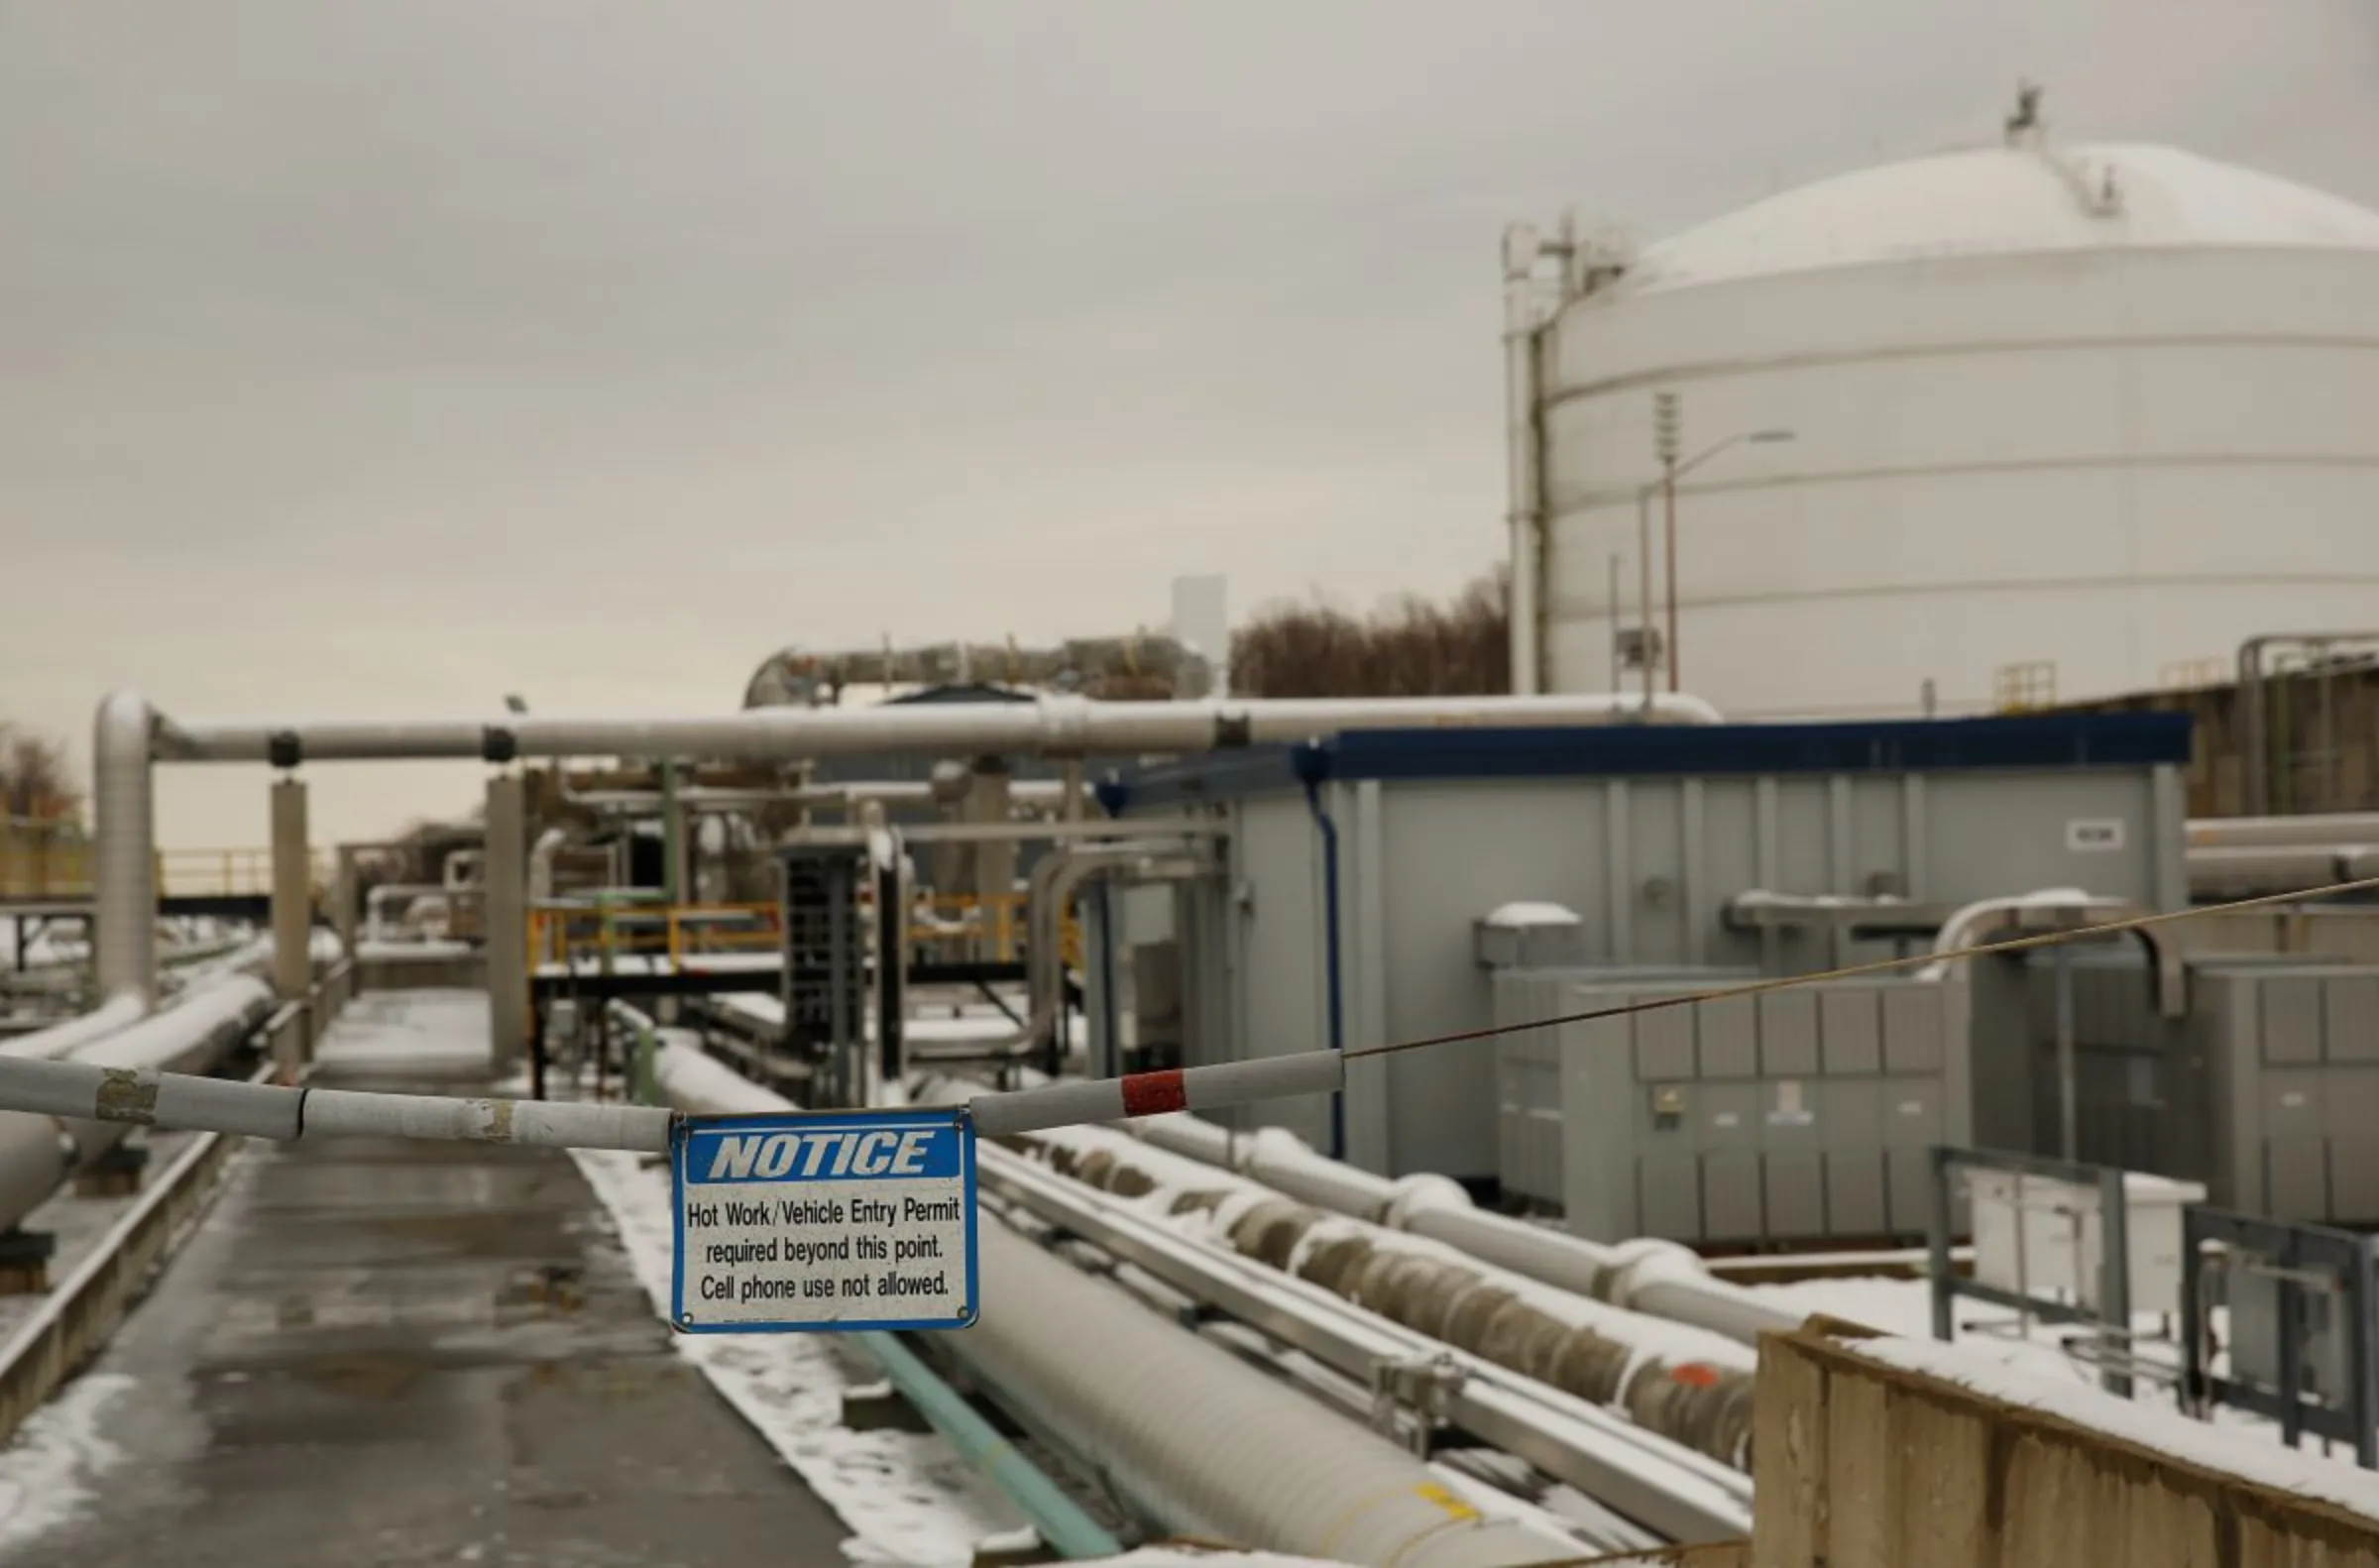 A warning sign at the perimeter of a transfer line area is seen at the Dominion Cove Point Liquefied Natural Gas (LNG) terminal in Lusby, Maryland March 18, 2014